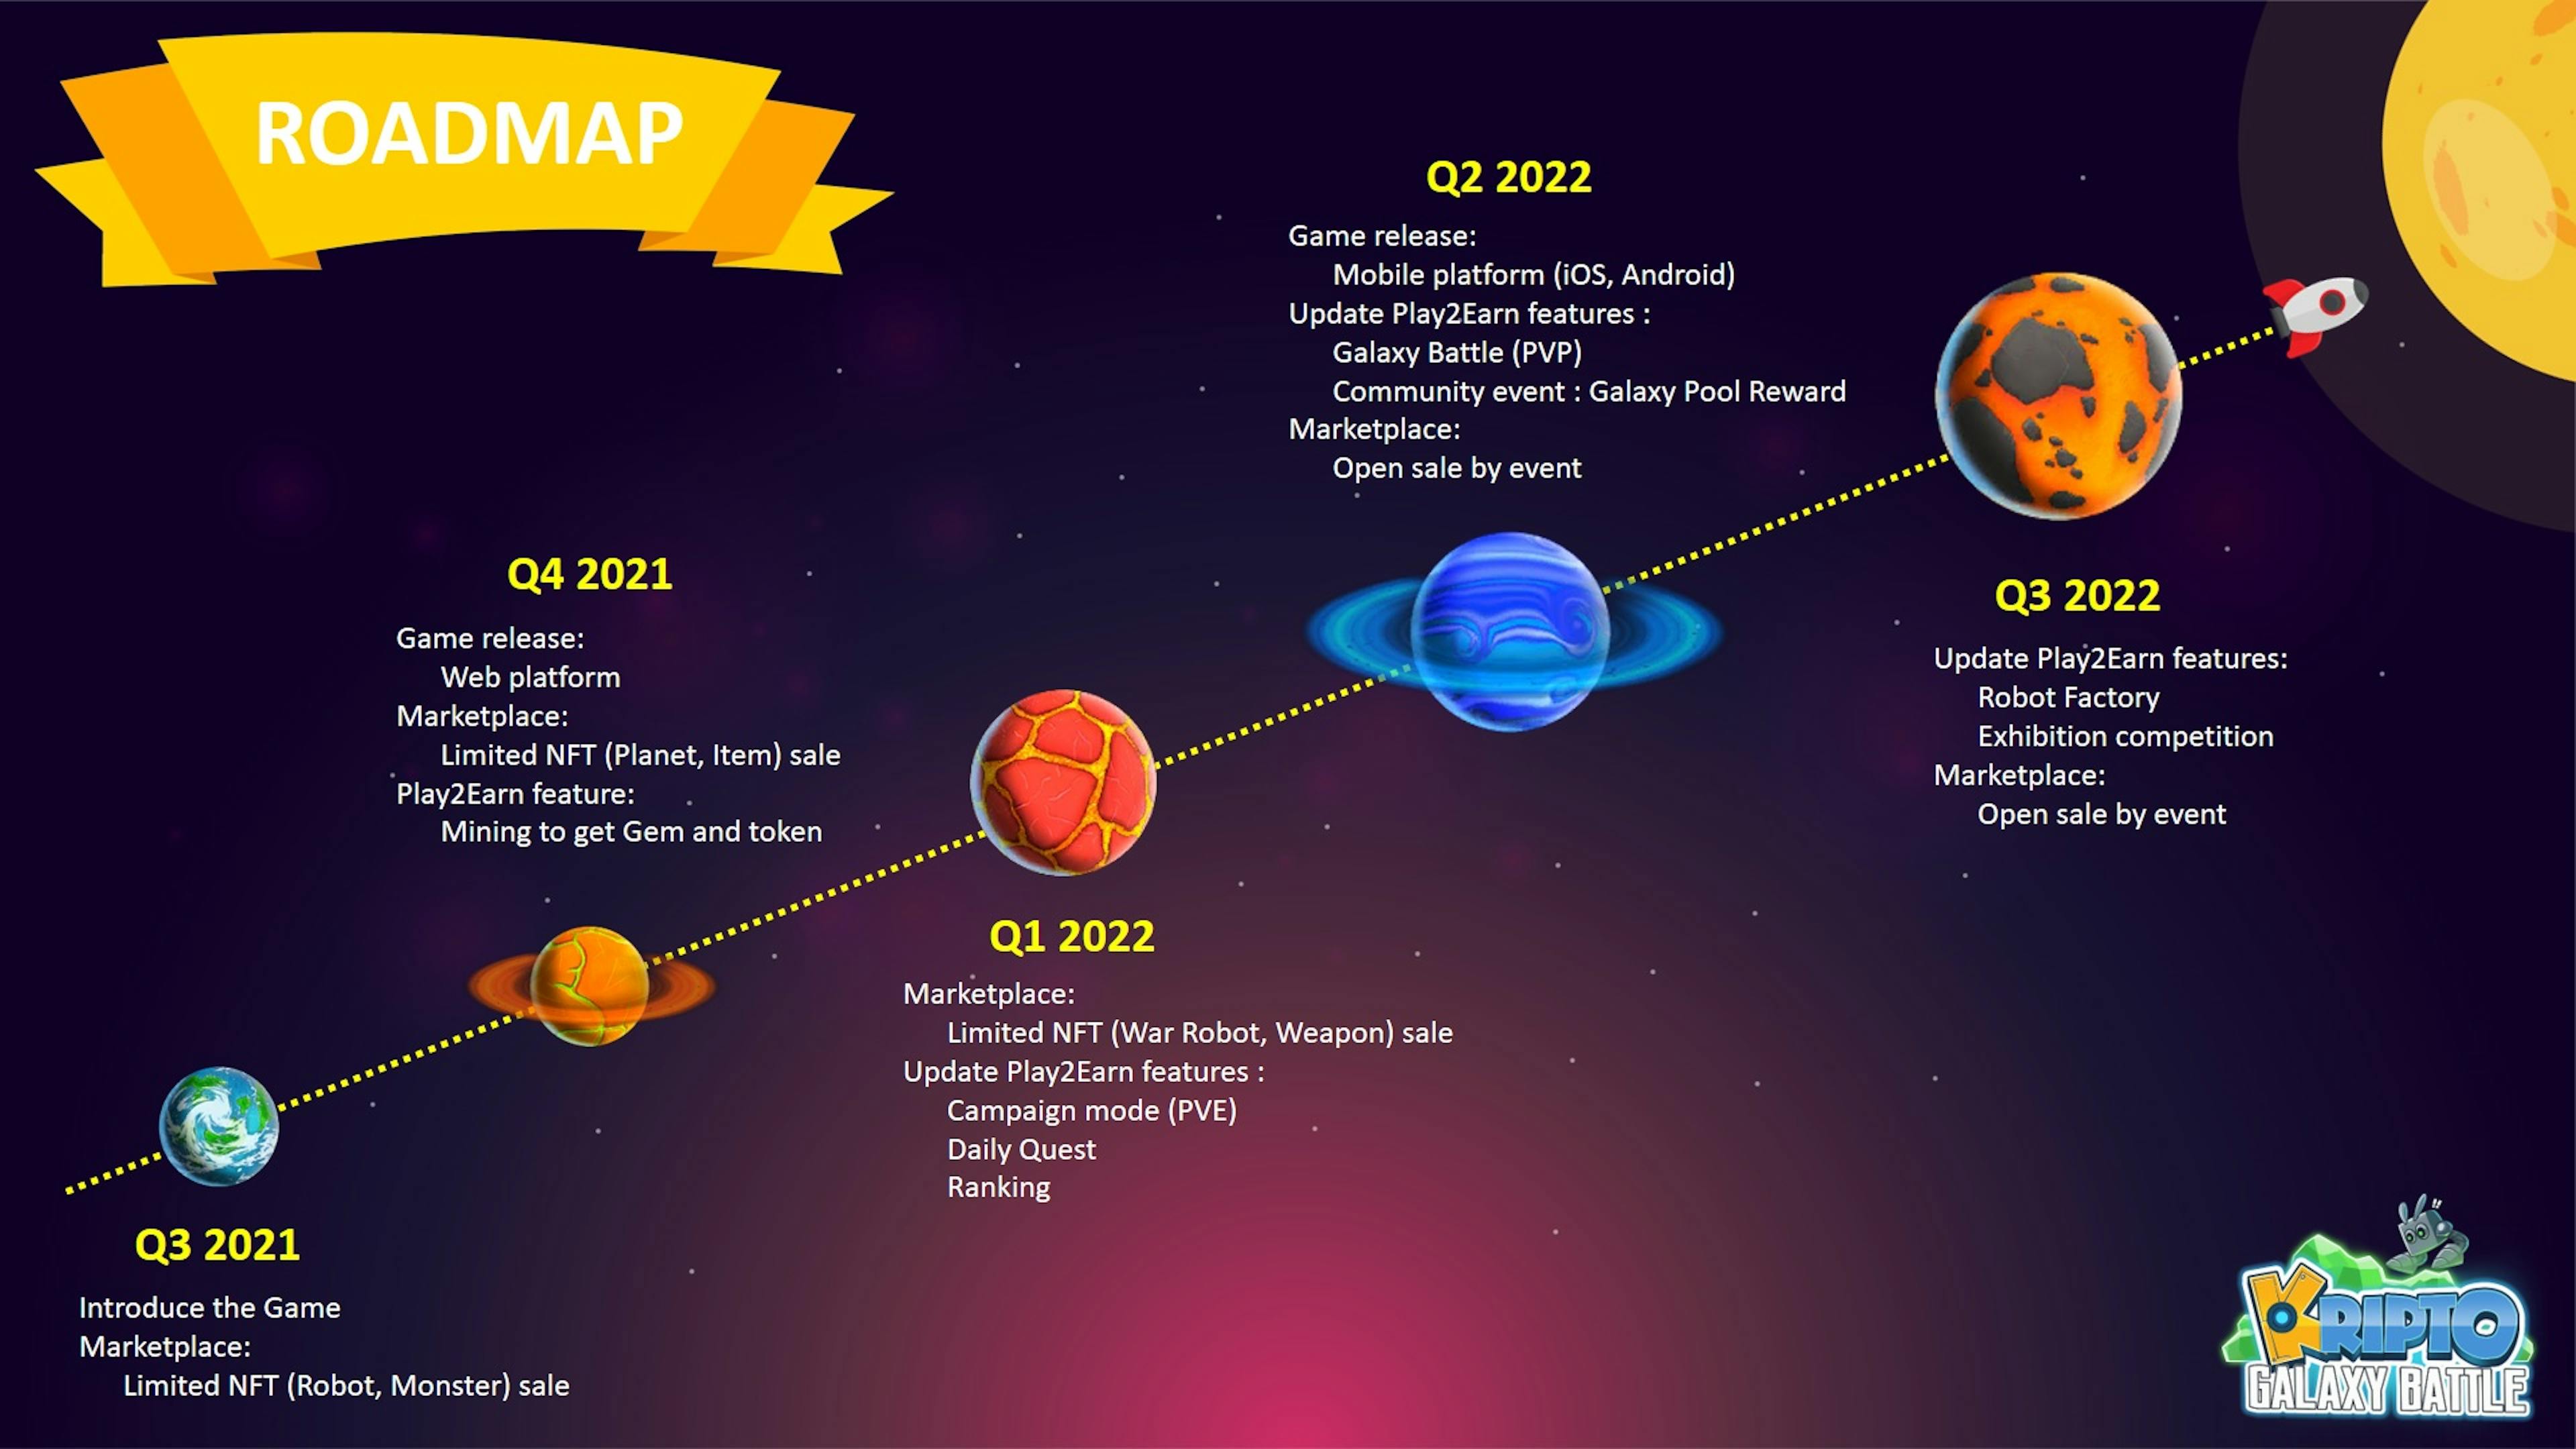 The game’s roadmap